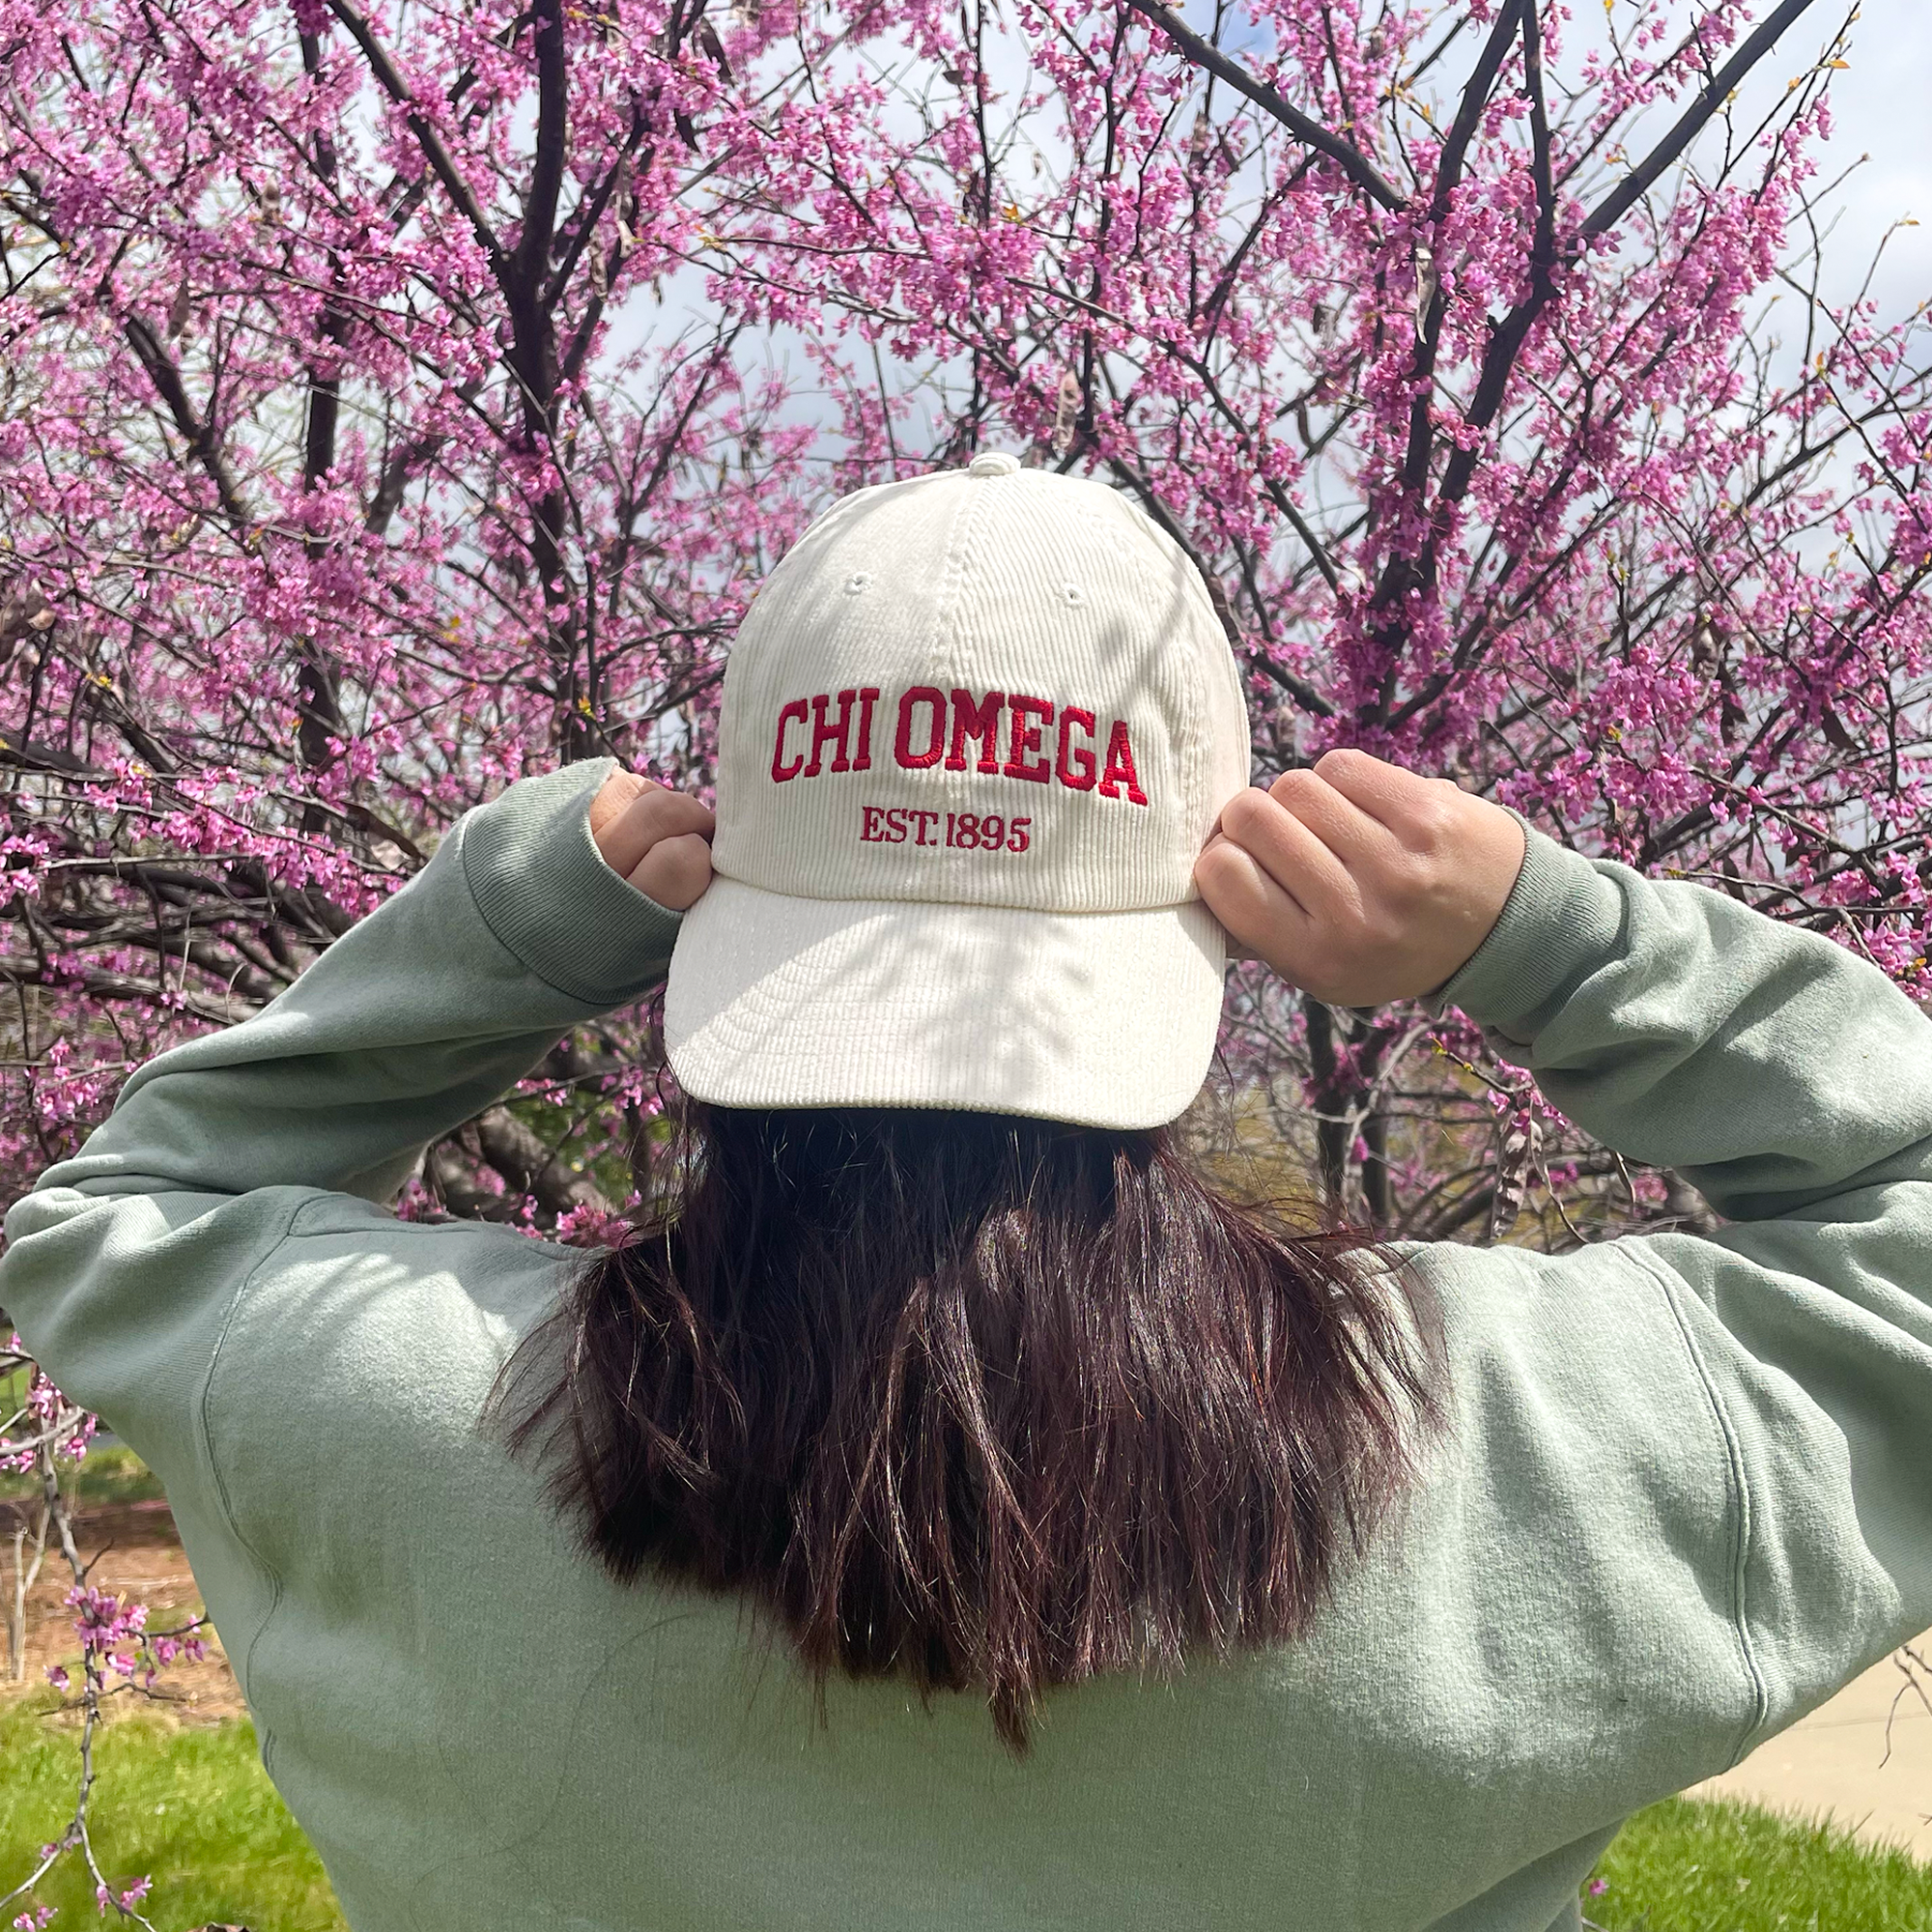 a person wearing a hat with the word chi omega on it